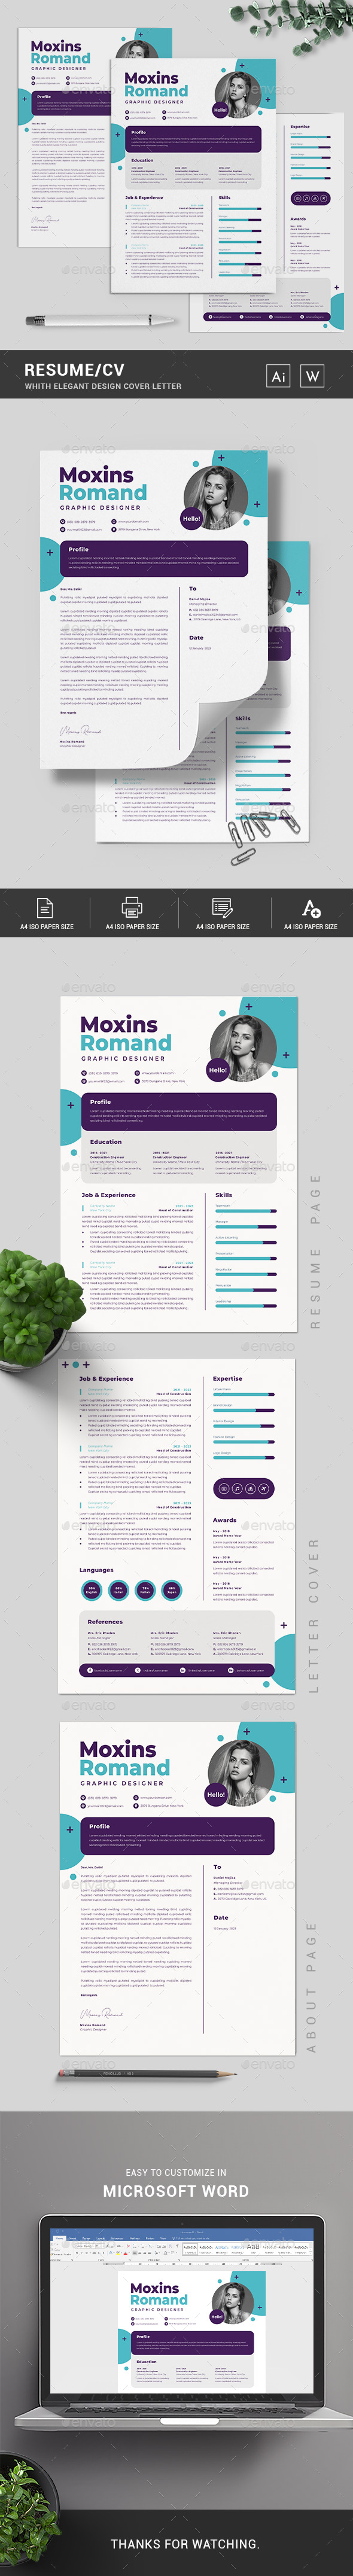 [DOWNLOAD]Resume Word Template